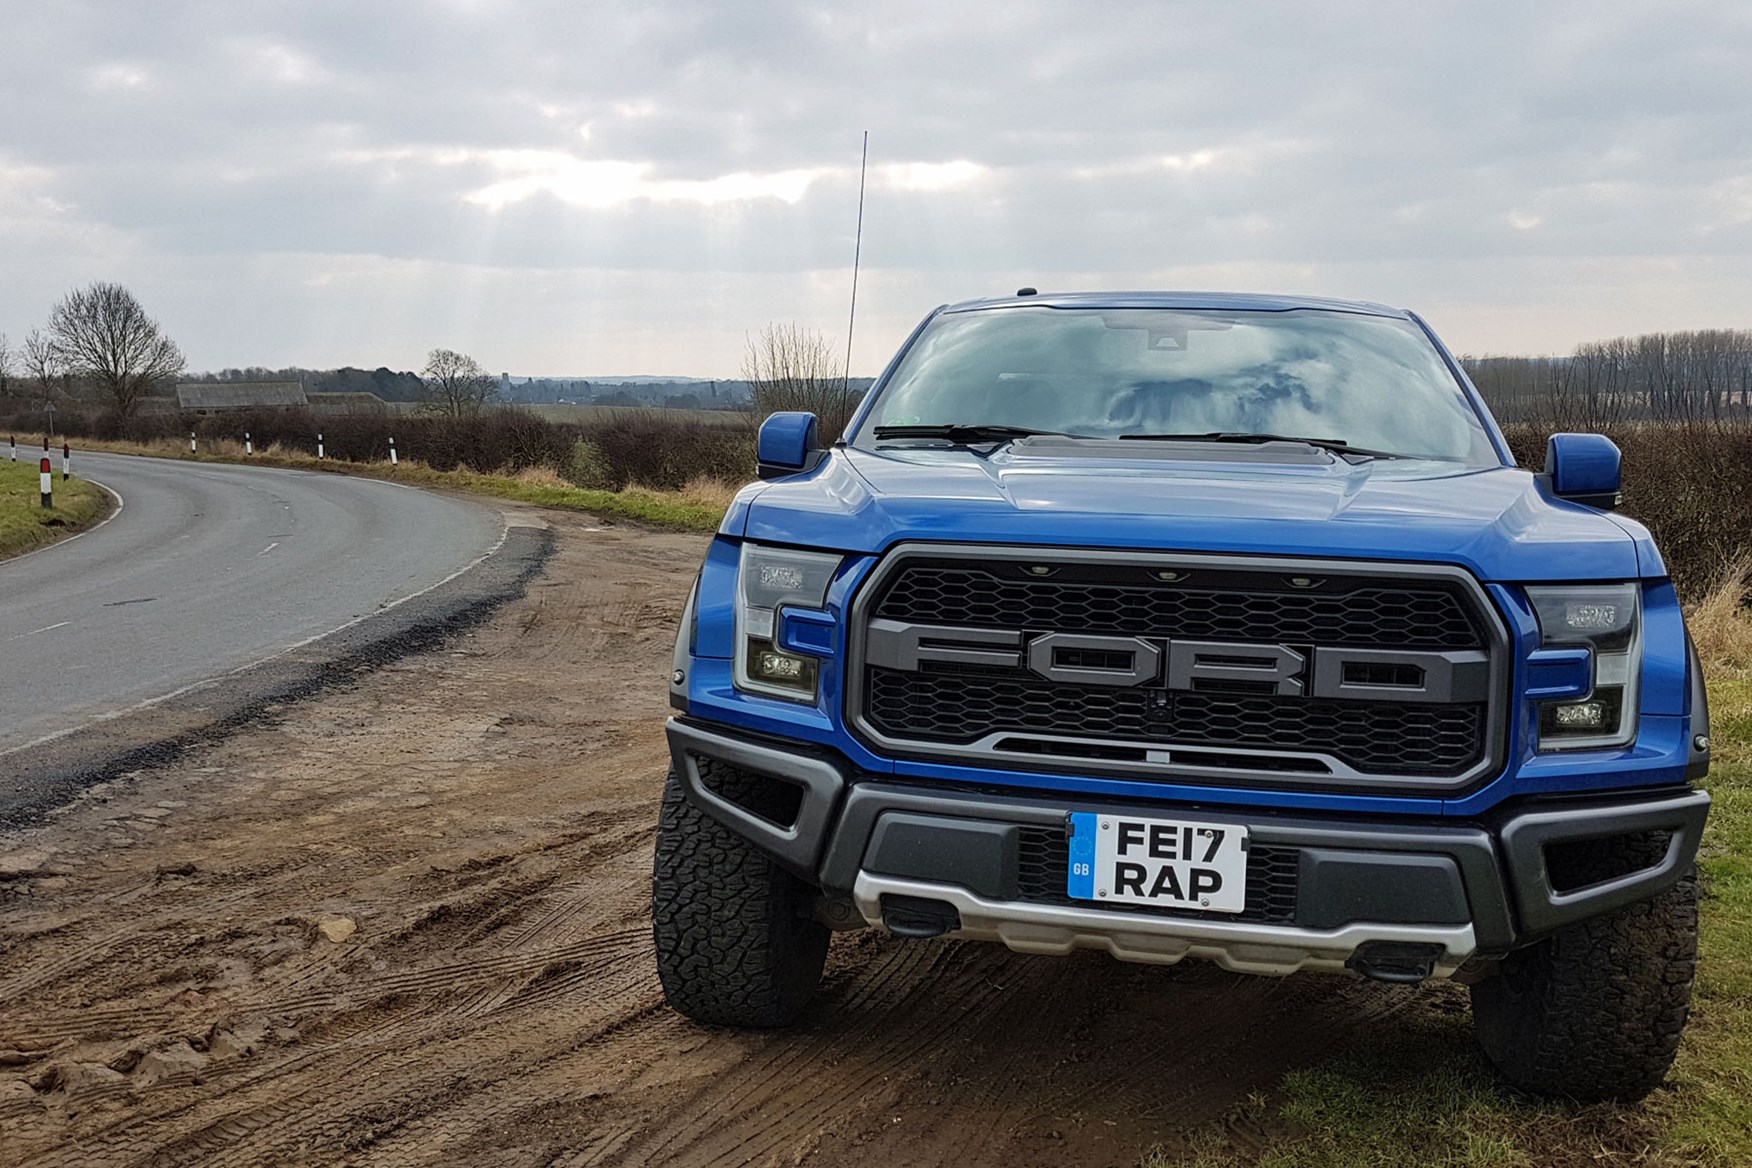 Ford F-150 Raptor review - taking high-performance pickups to another level | Parkers1752 x 1168